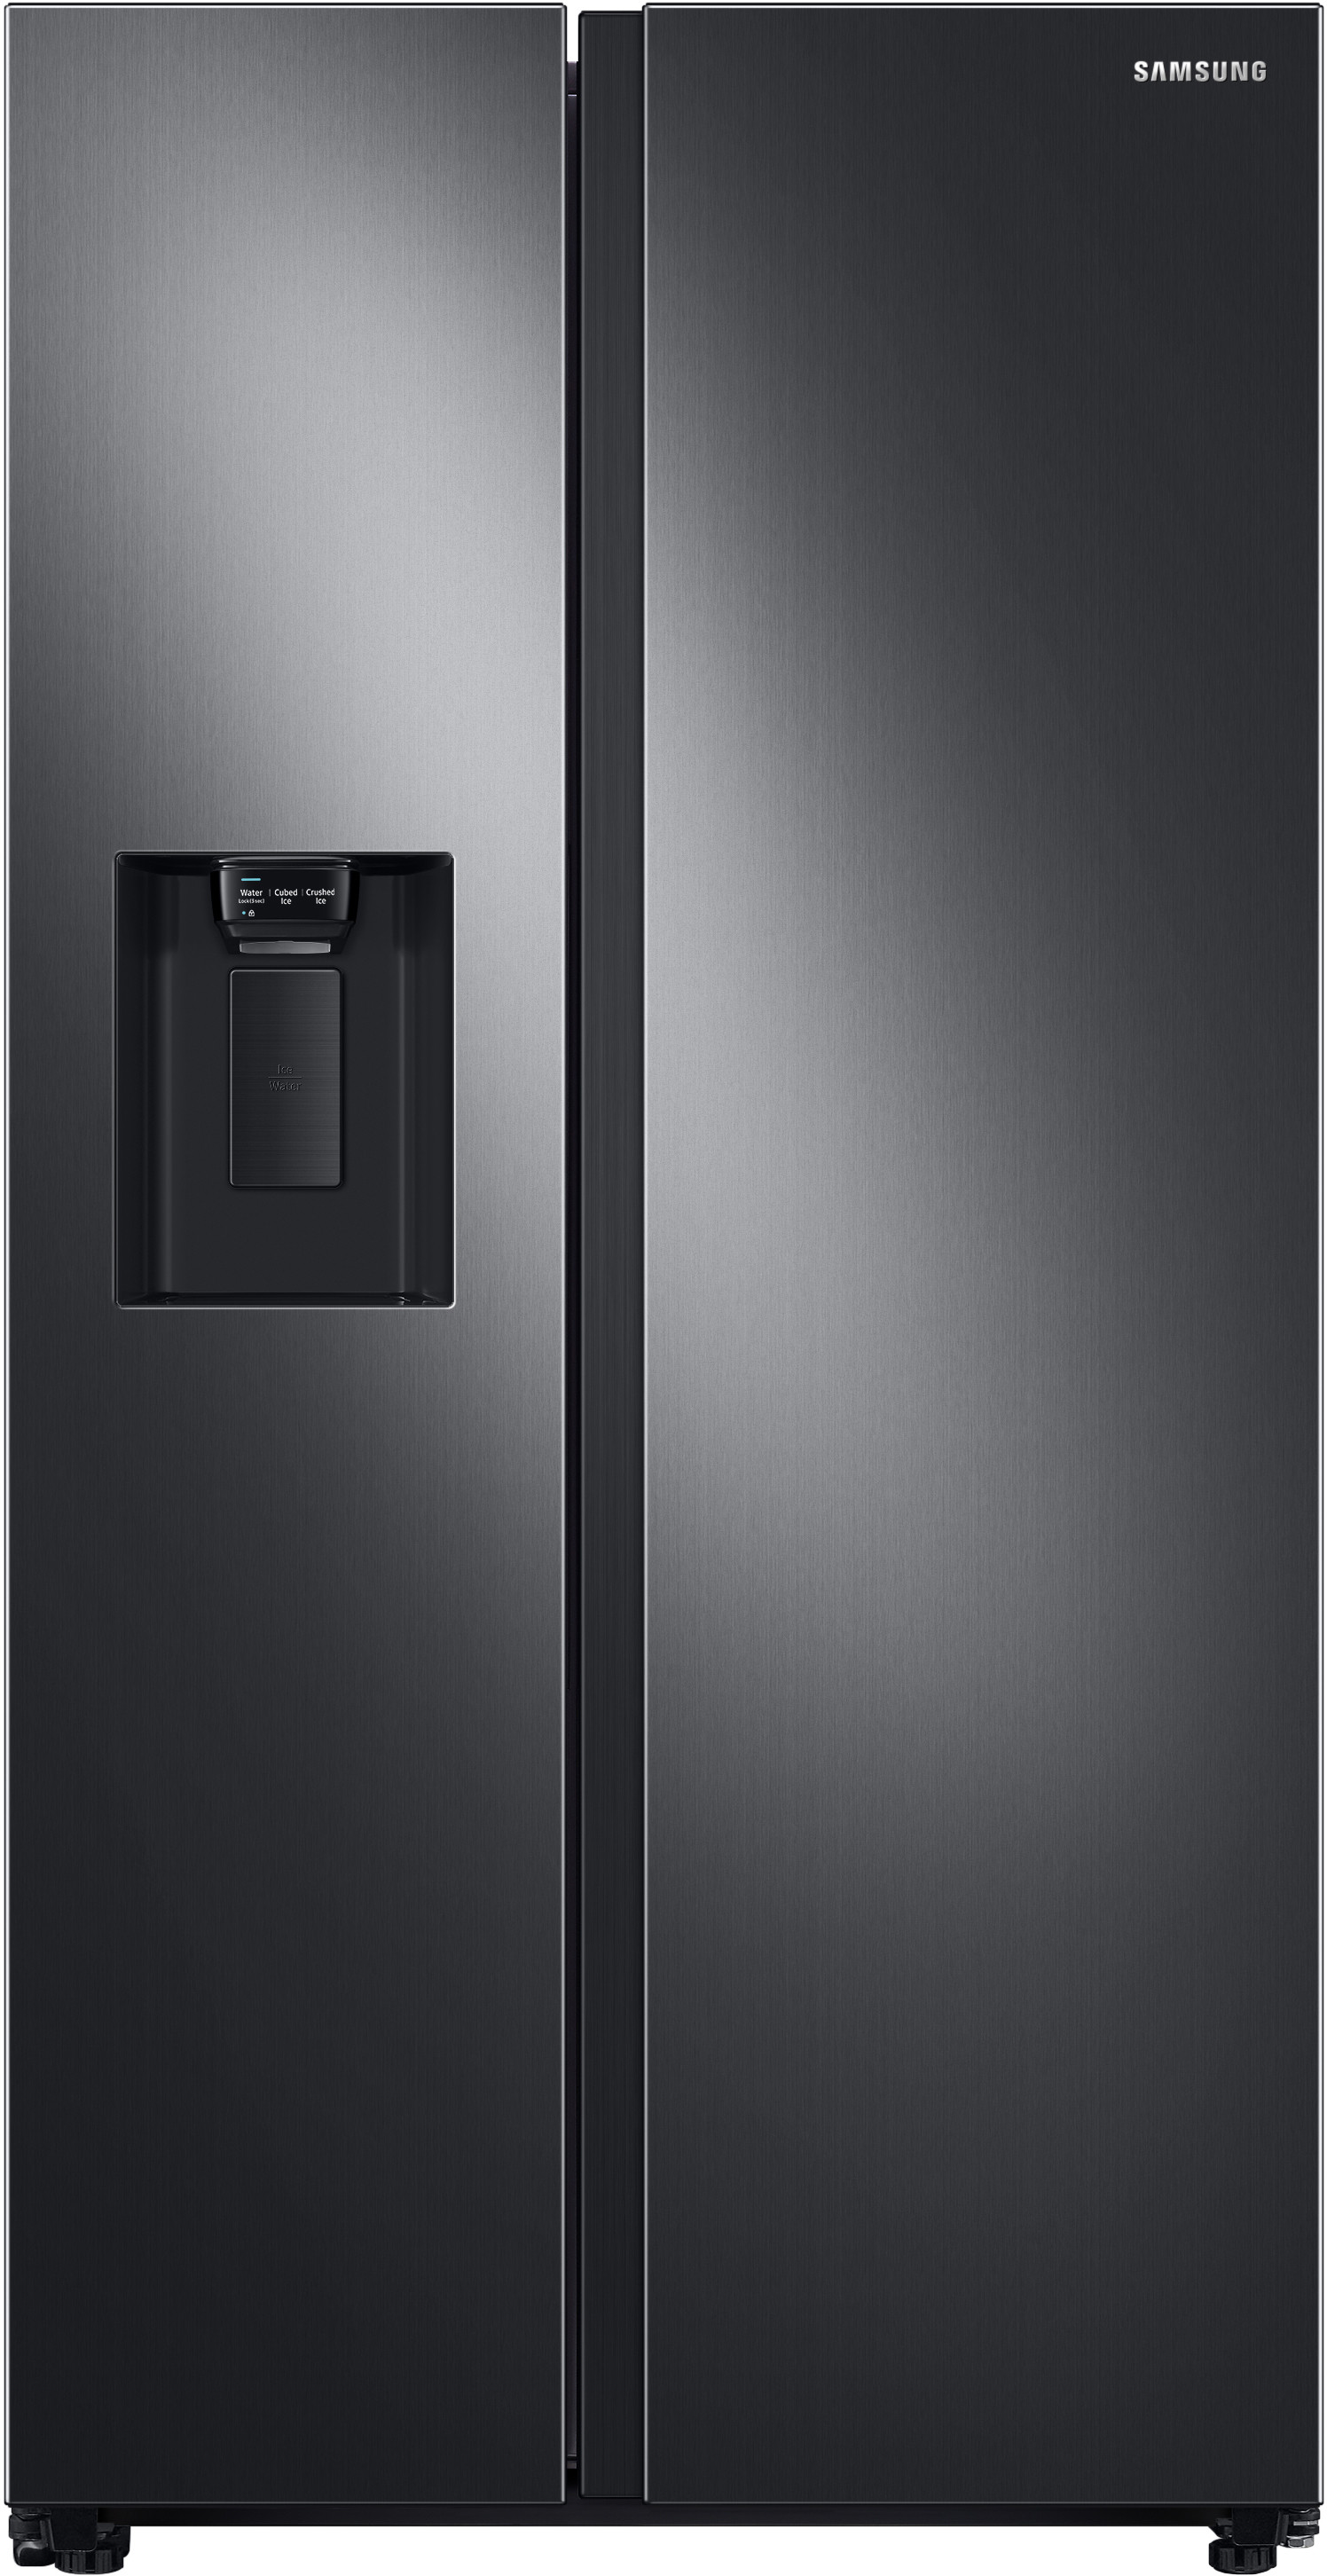 Samsung 36 Inch 36 Side-by-Side Refrigerator RS27T5200SG